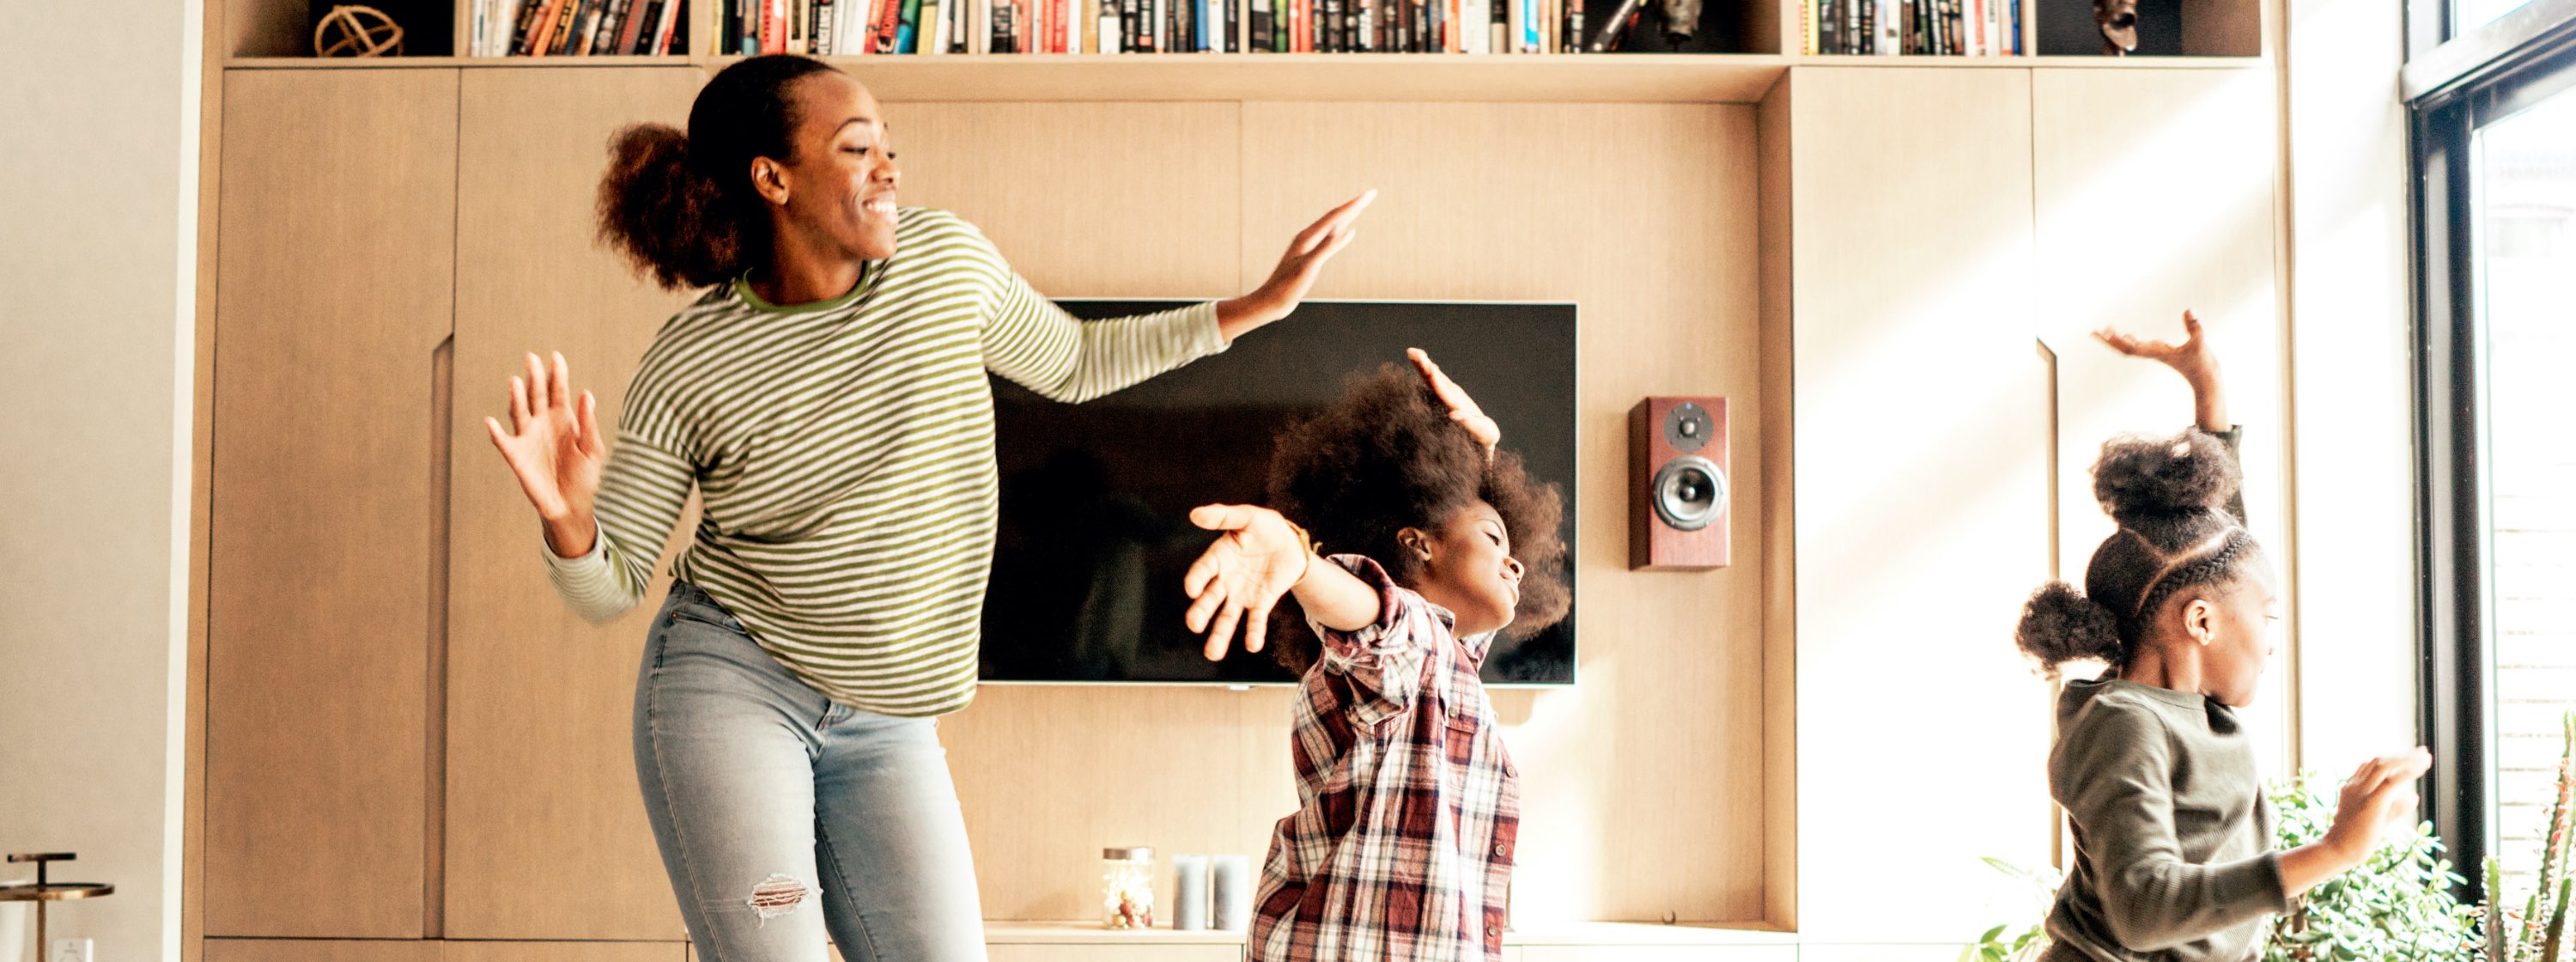 A mum and her kids dancing in the living room